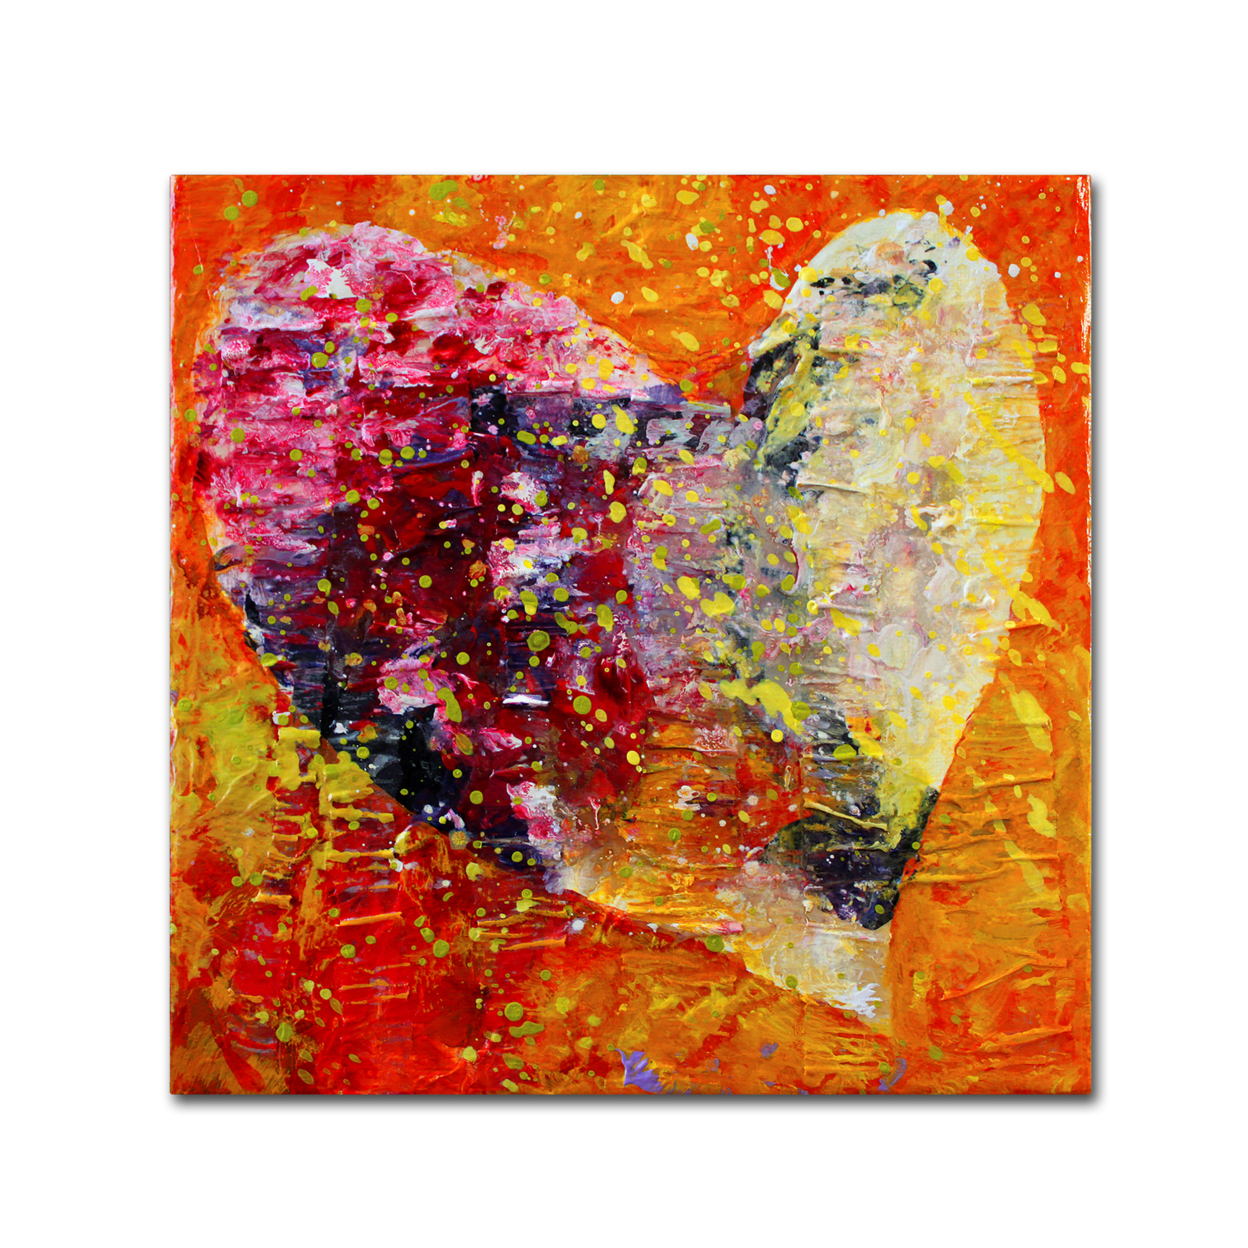 Marion Rose 'Heart' Ready To Hang Canvas Art 35 X 35 Inches Made In USA